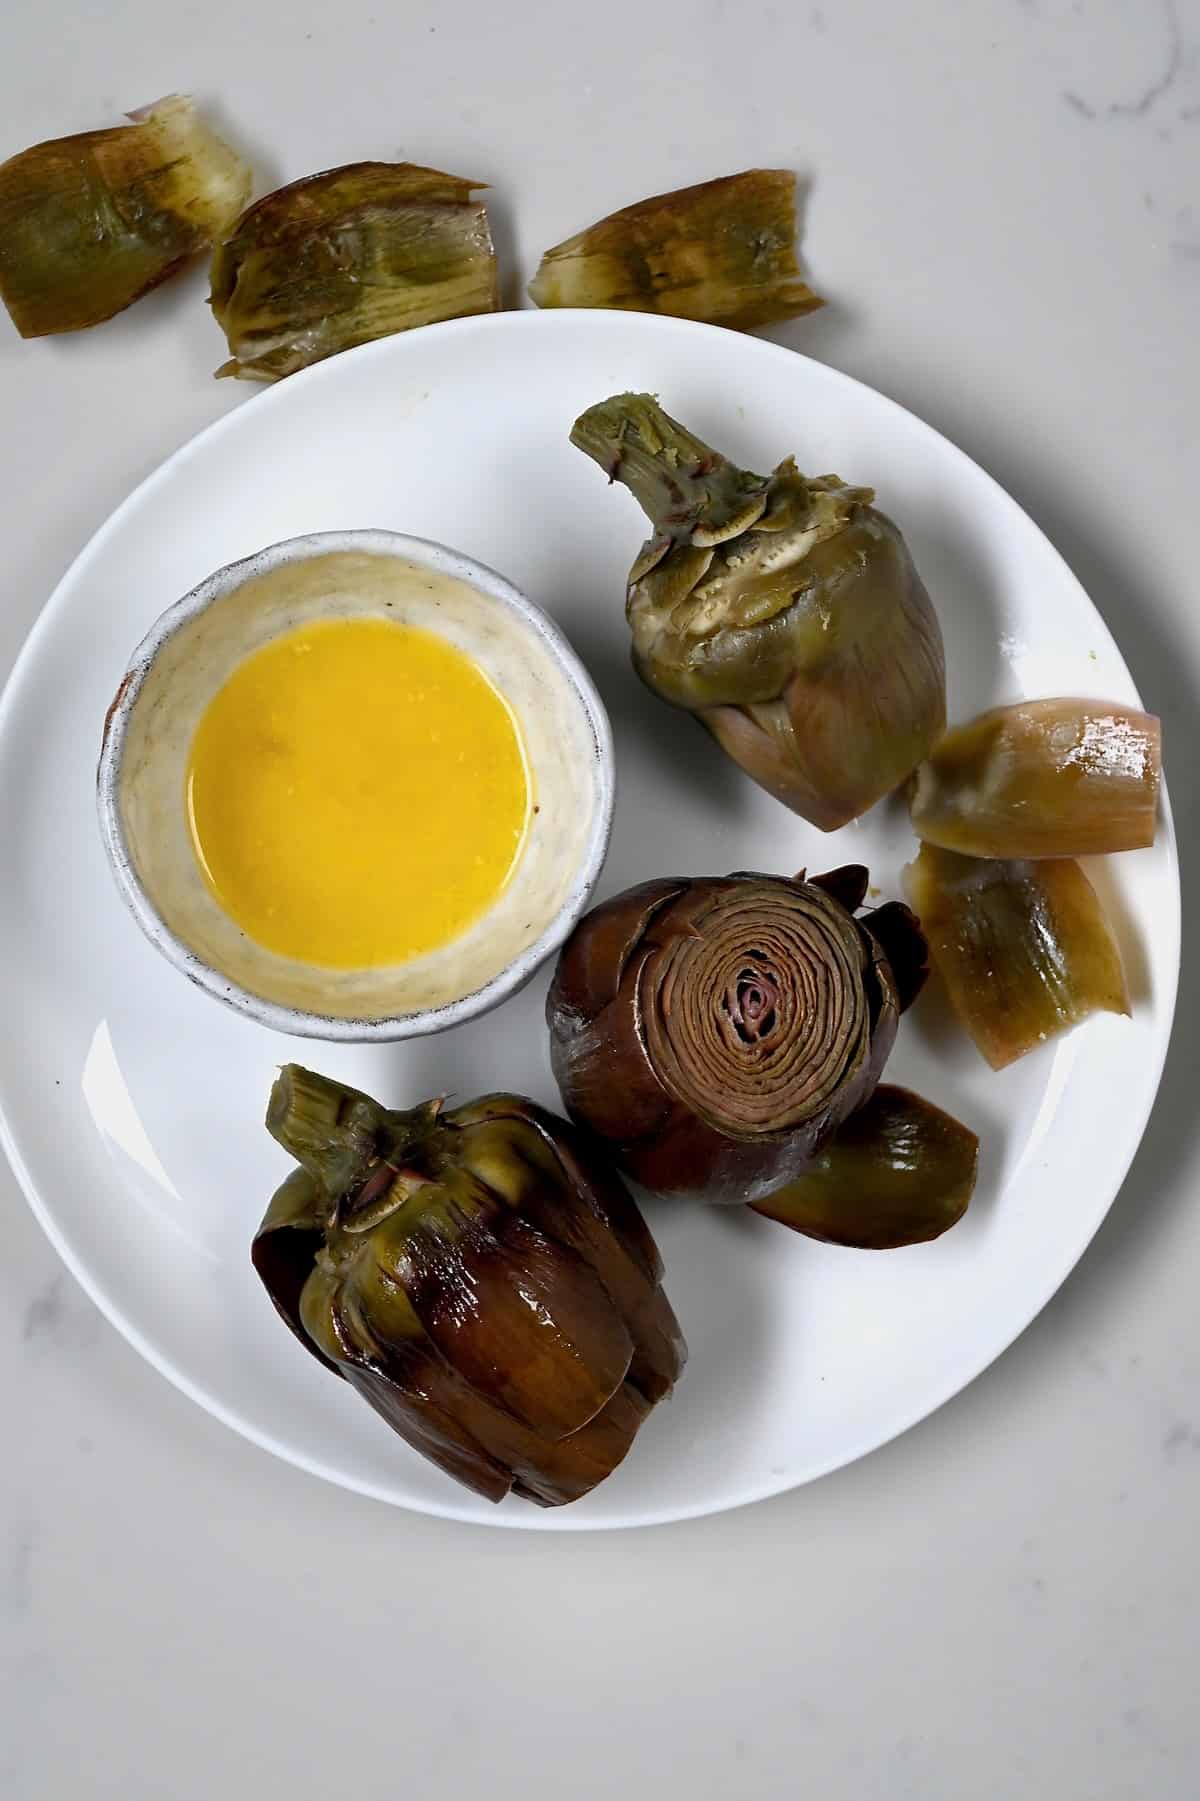 Cooked artichoke served with lemon butter sauce